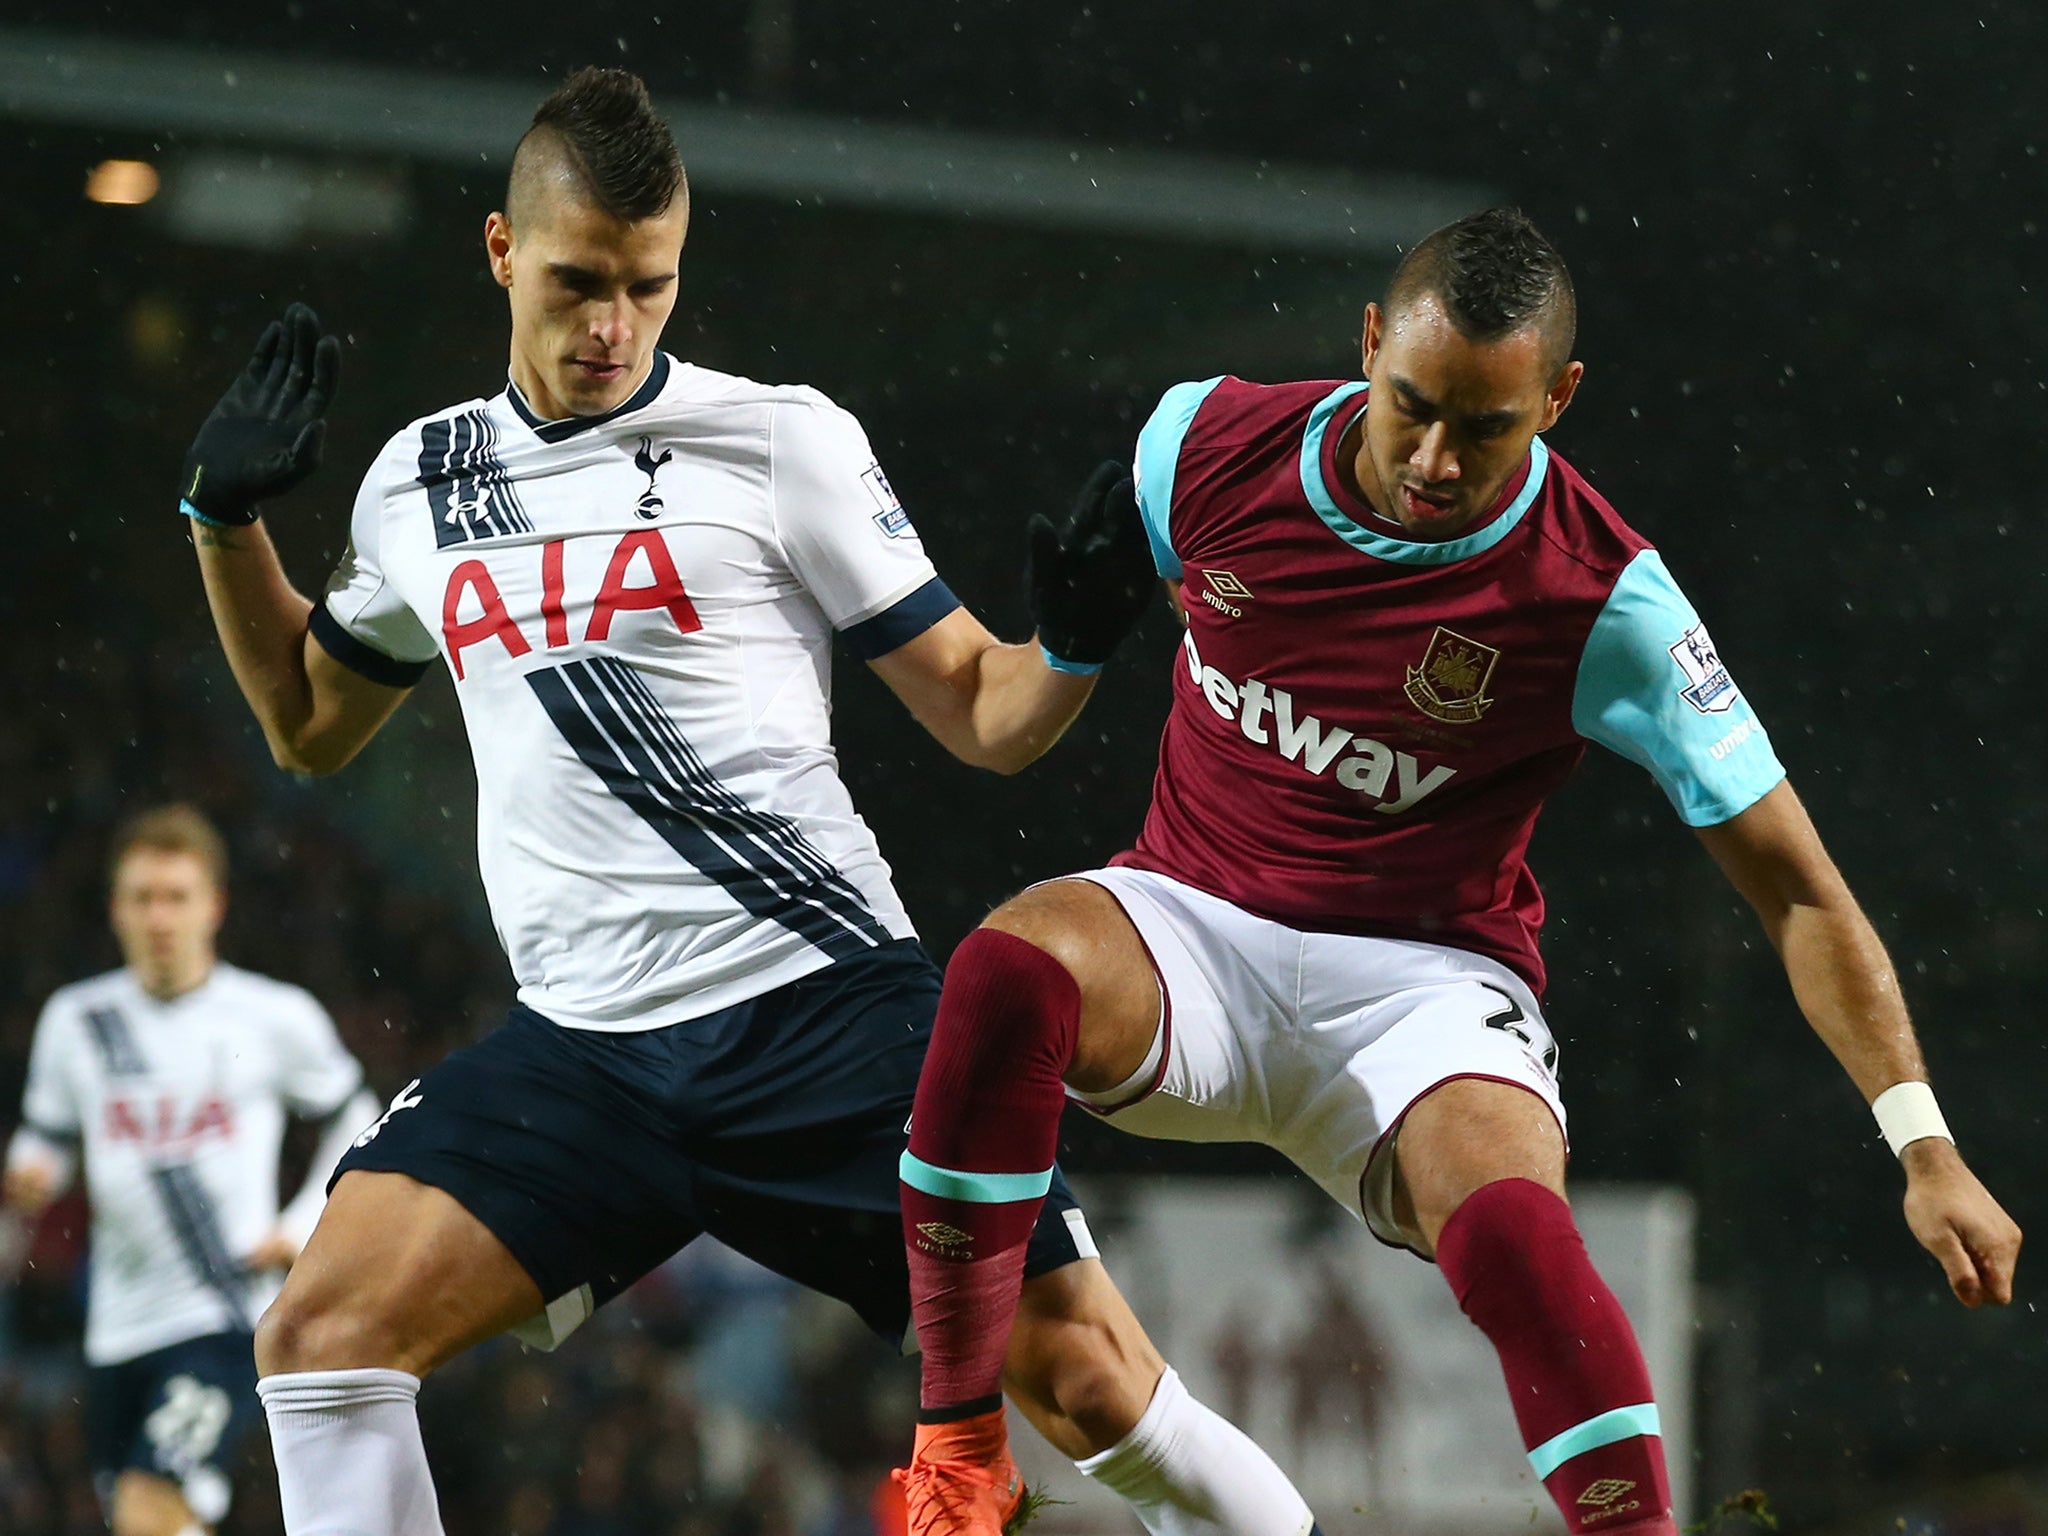 Erik Lamela and Dimitri Payet compete for the ball